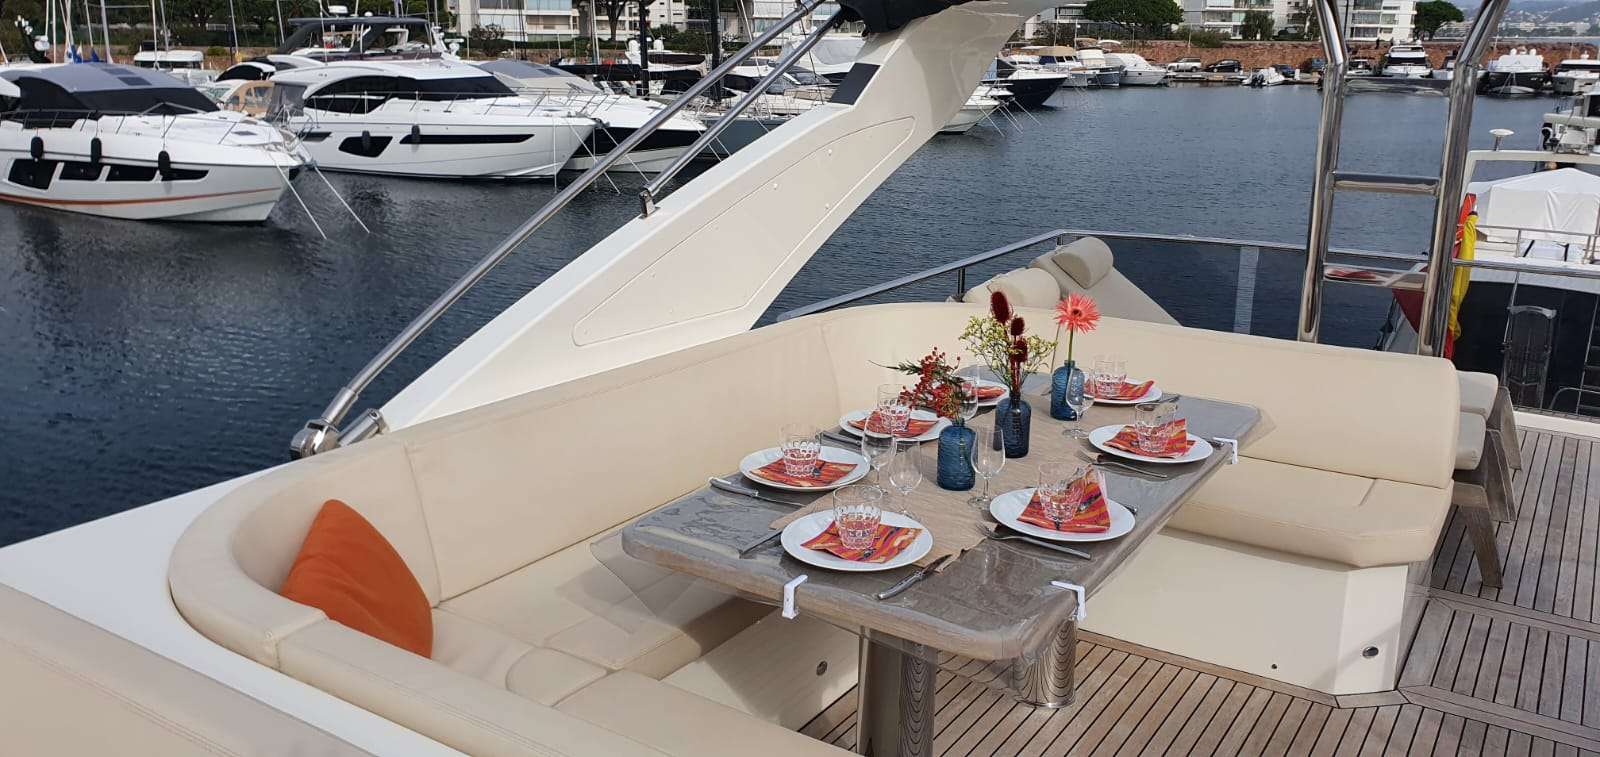 ABSOLUTE - Yacht Charter Cannes & Boat hire in Fr. Riviera, Corsica & Sardinia 3